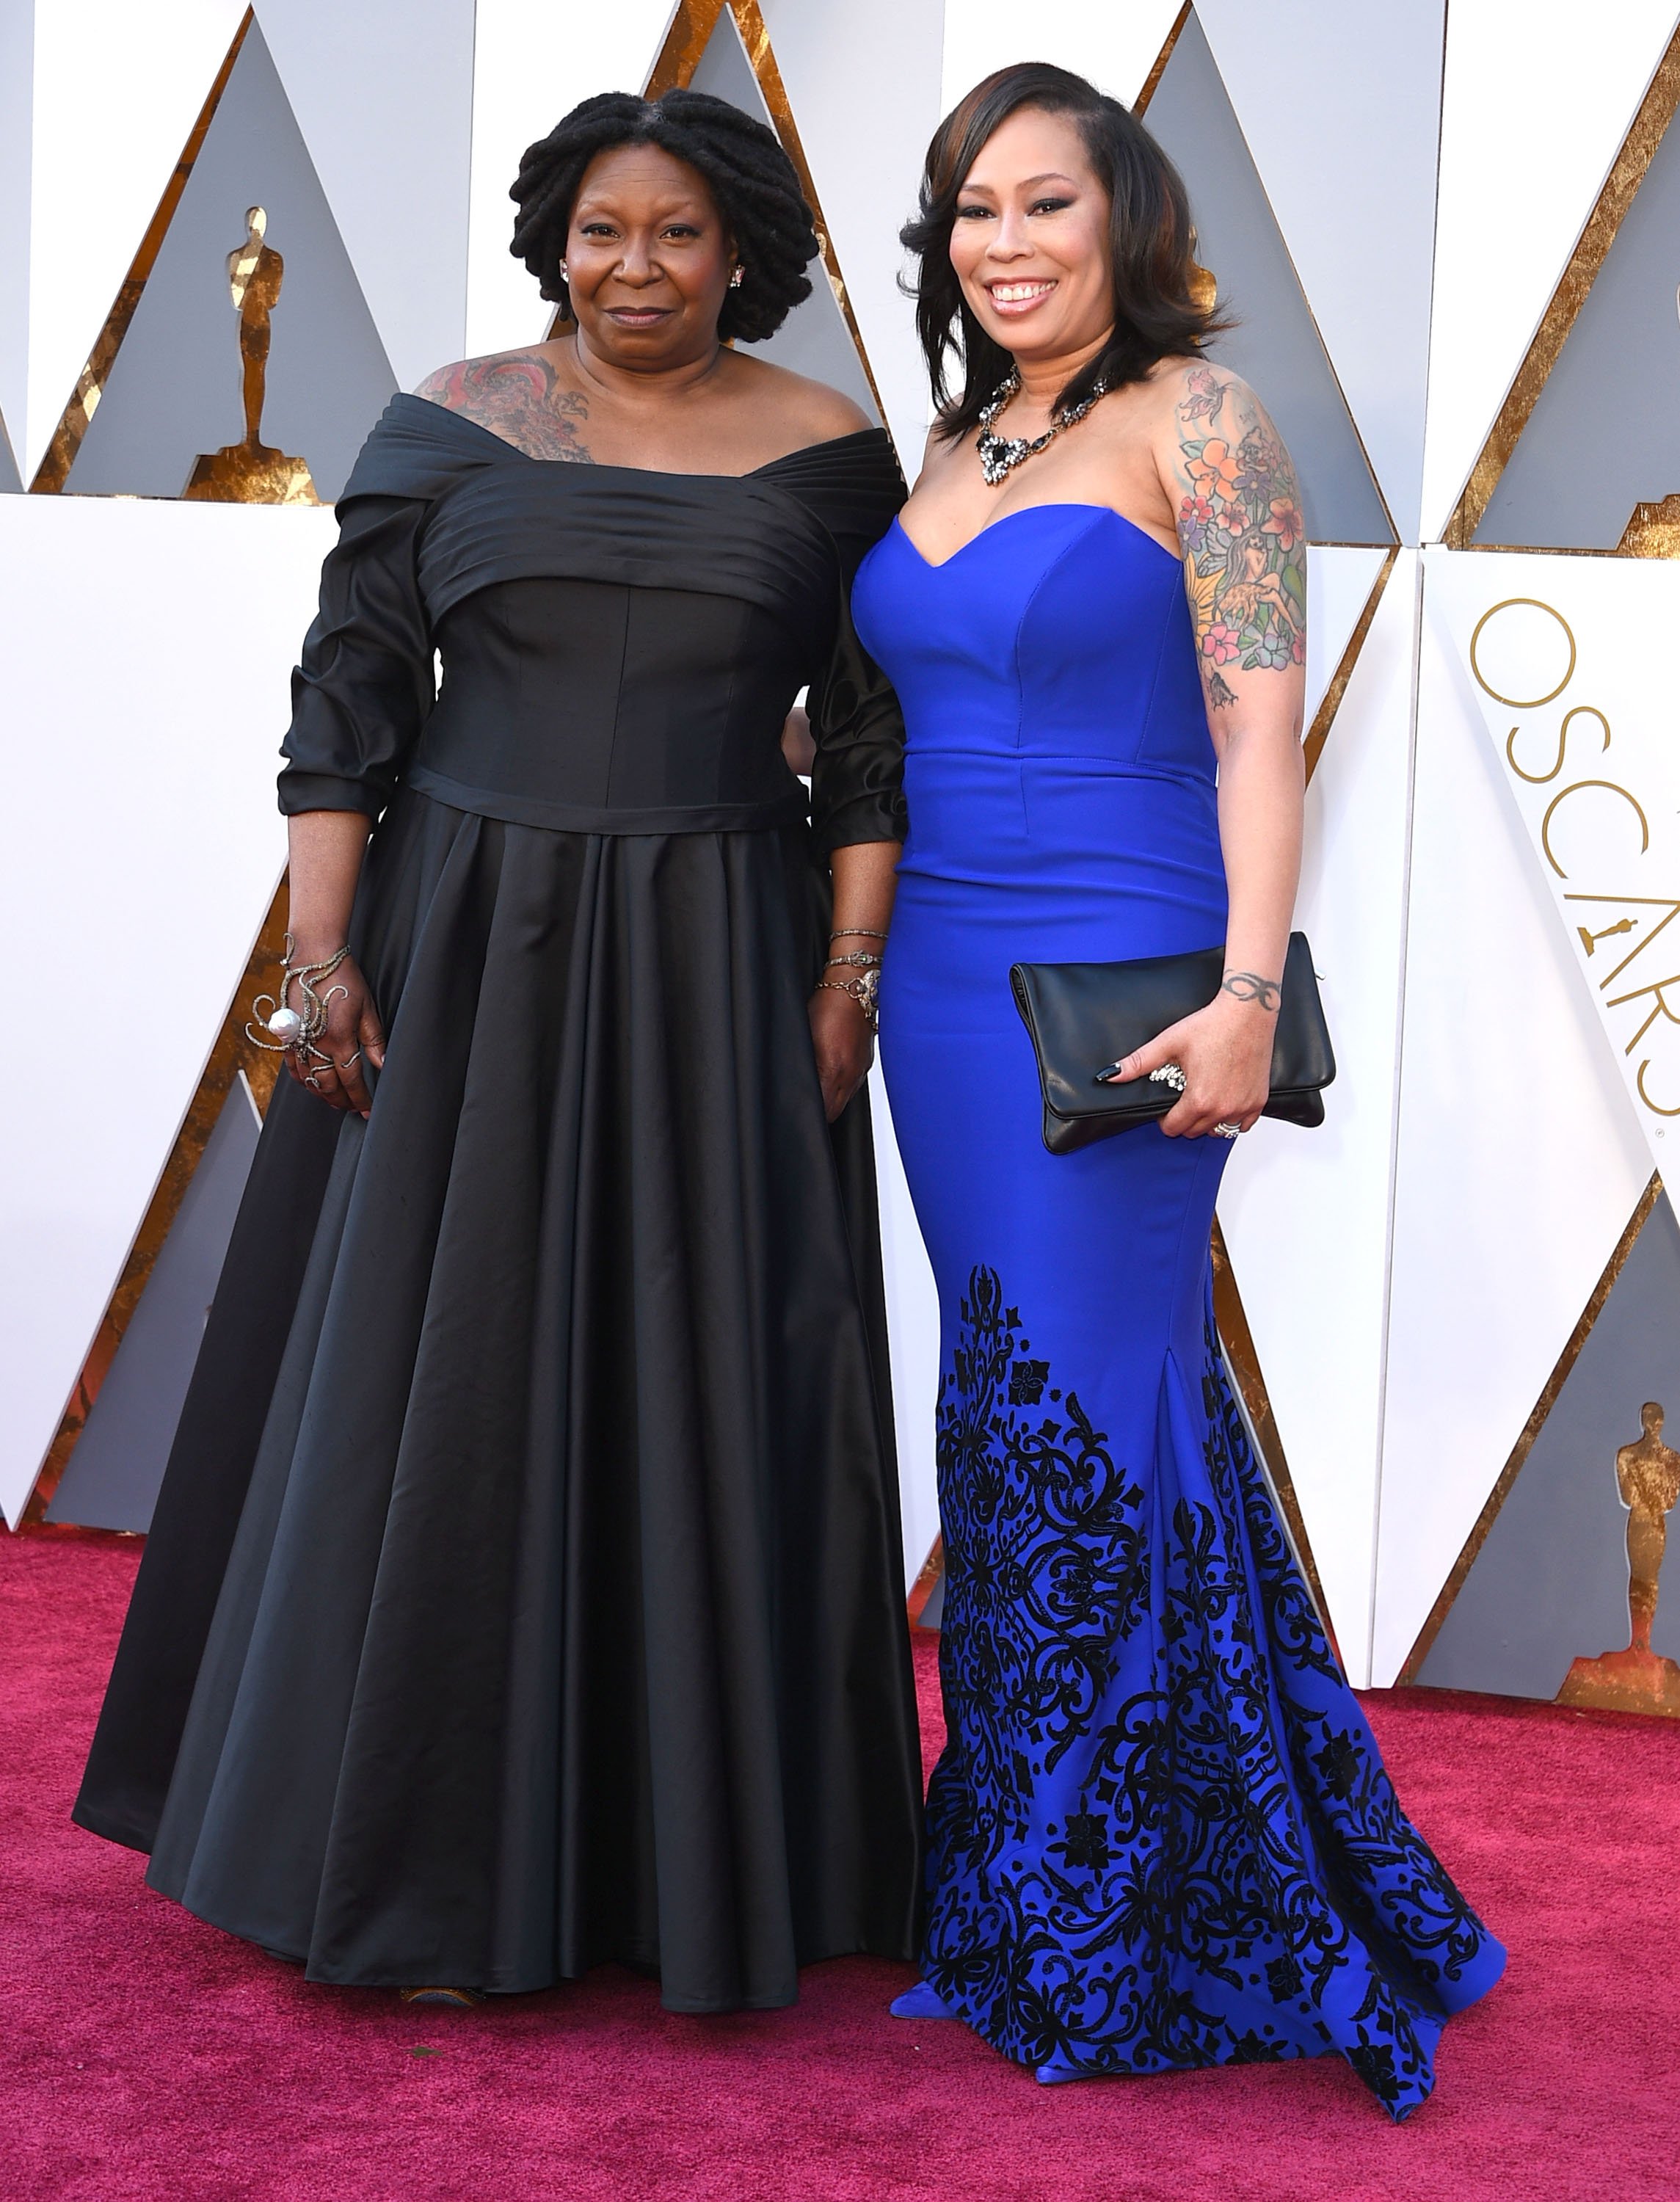 Whoopi Goldberg and her daughter, Alexandrea Martin, are pictured arriving at the 88th Annual Academy Awards at Hollywood & Highland Center on February 28, 2016, in Hollywood, California | Source: Getty Images